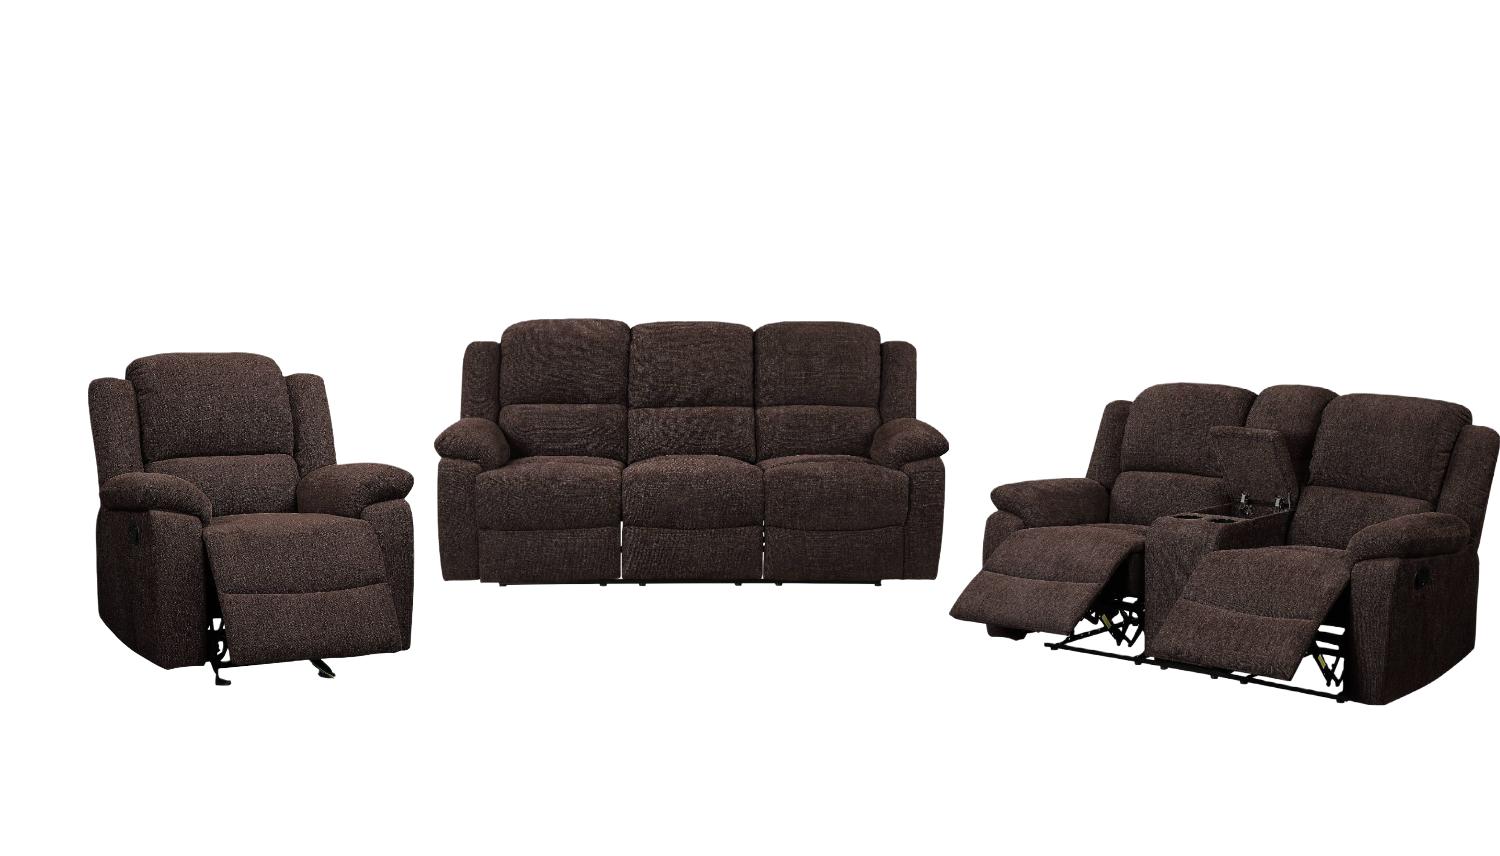 

    
Contemporary Brown Chenille Sofa + Loveseat + Recliner w/Console by Acme Madden 55445-3pcs
